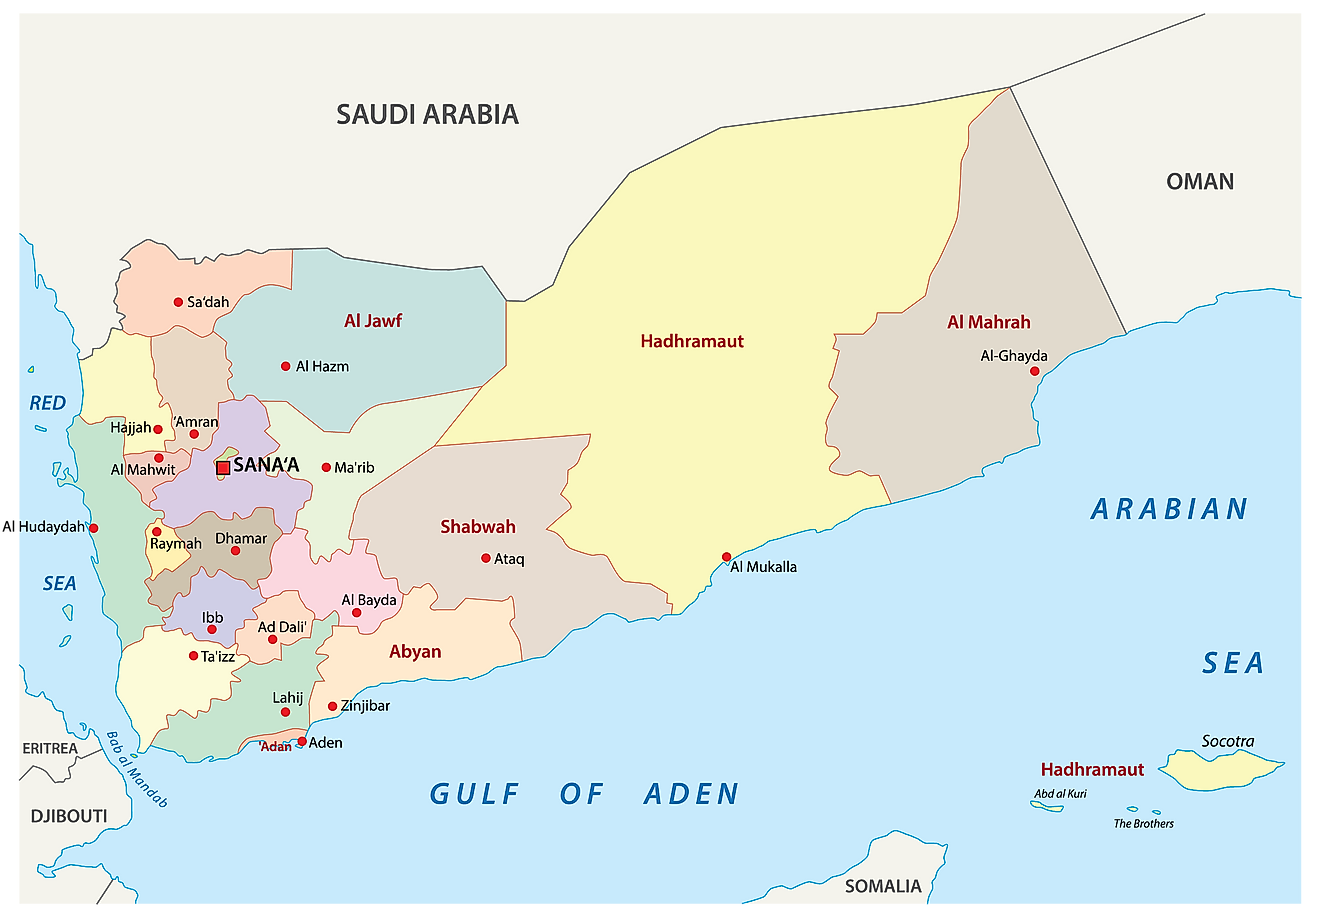 The Political Map of Yemen showing its 22 governorates, their capitals, and the capital city of Sana´a.